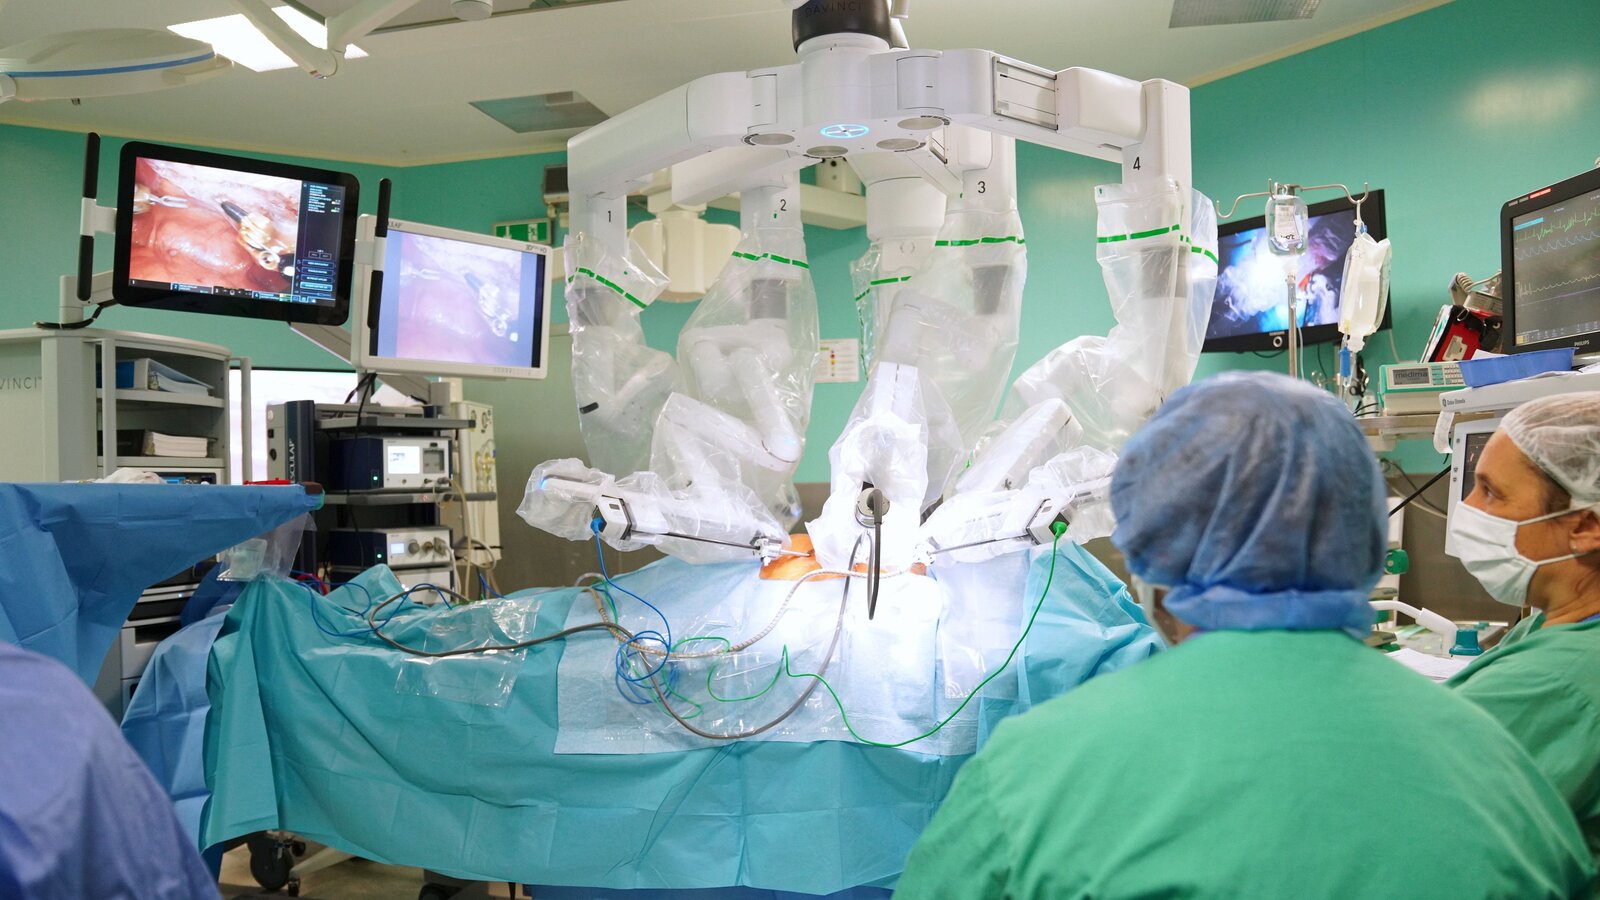 Robot-Assisted Surgery: The Future of Medical Procedures